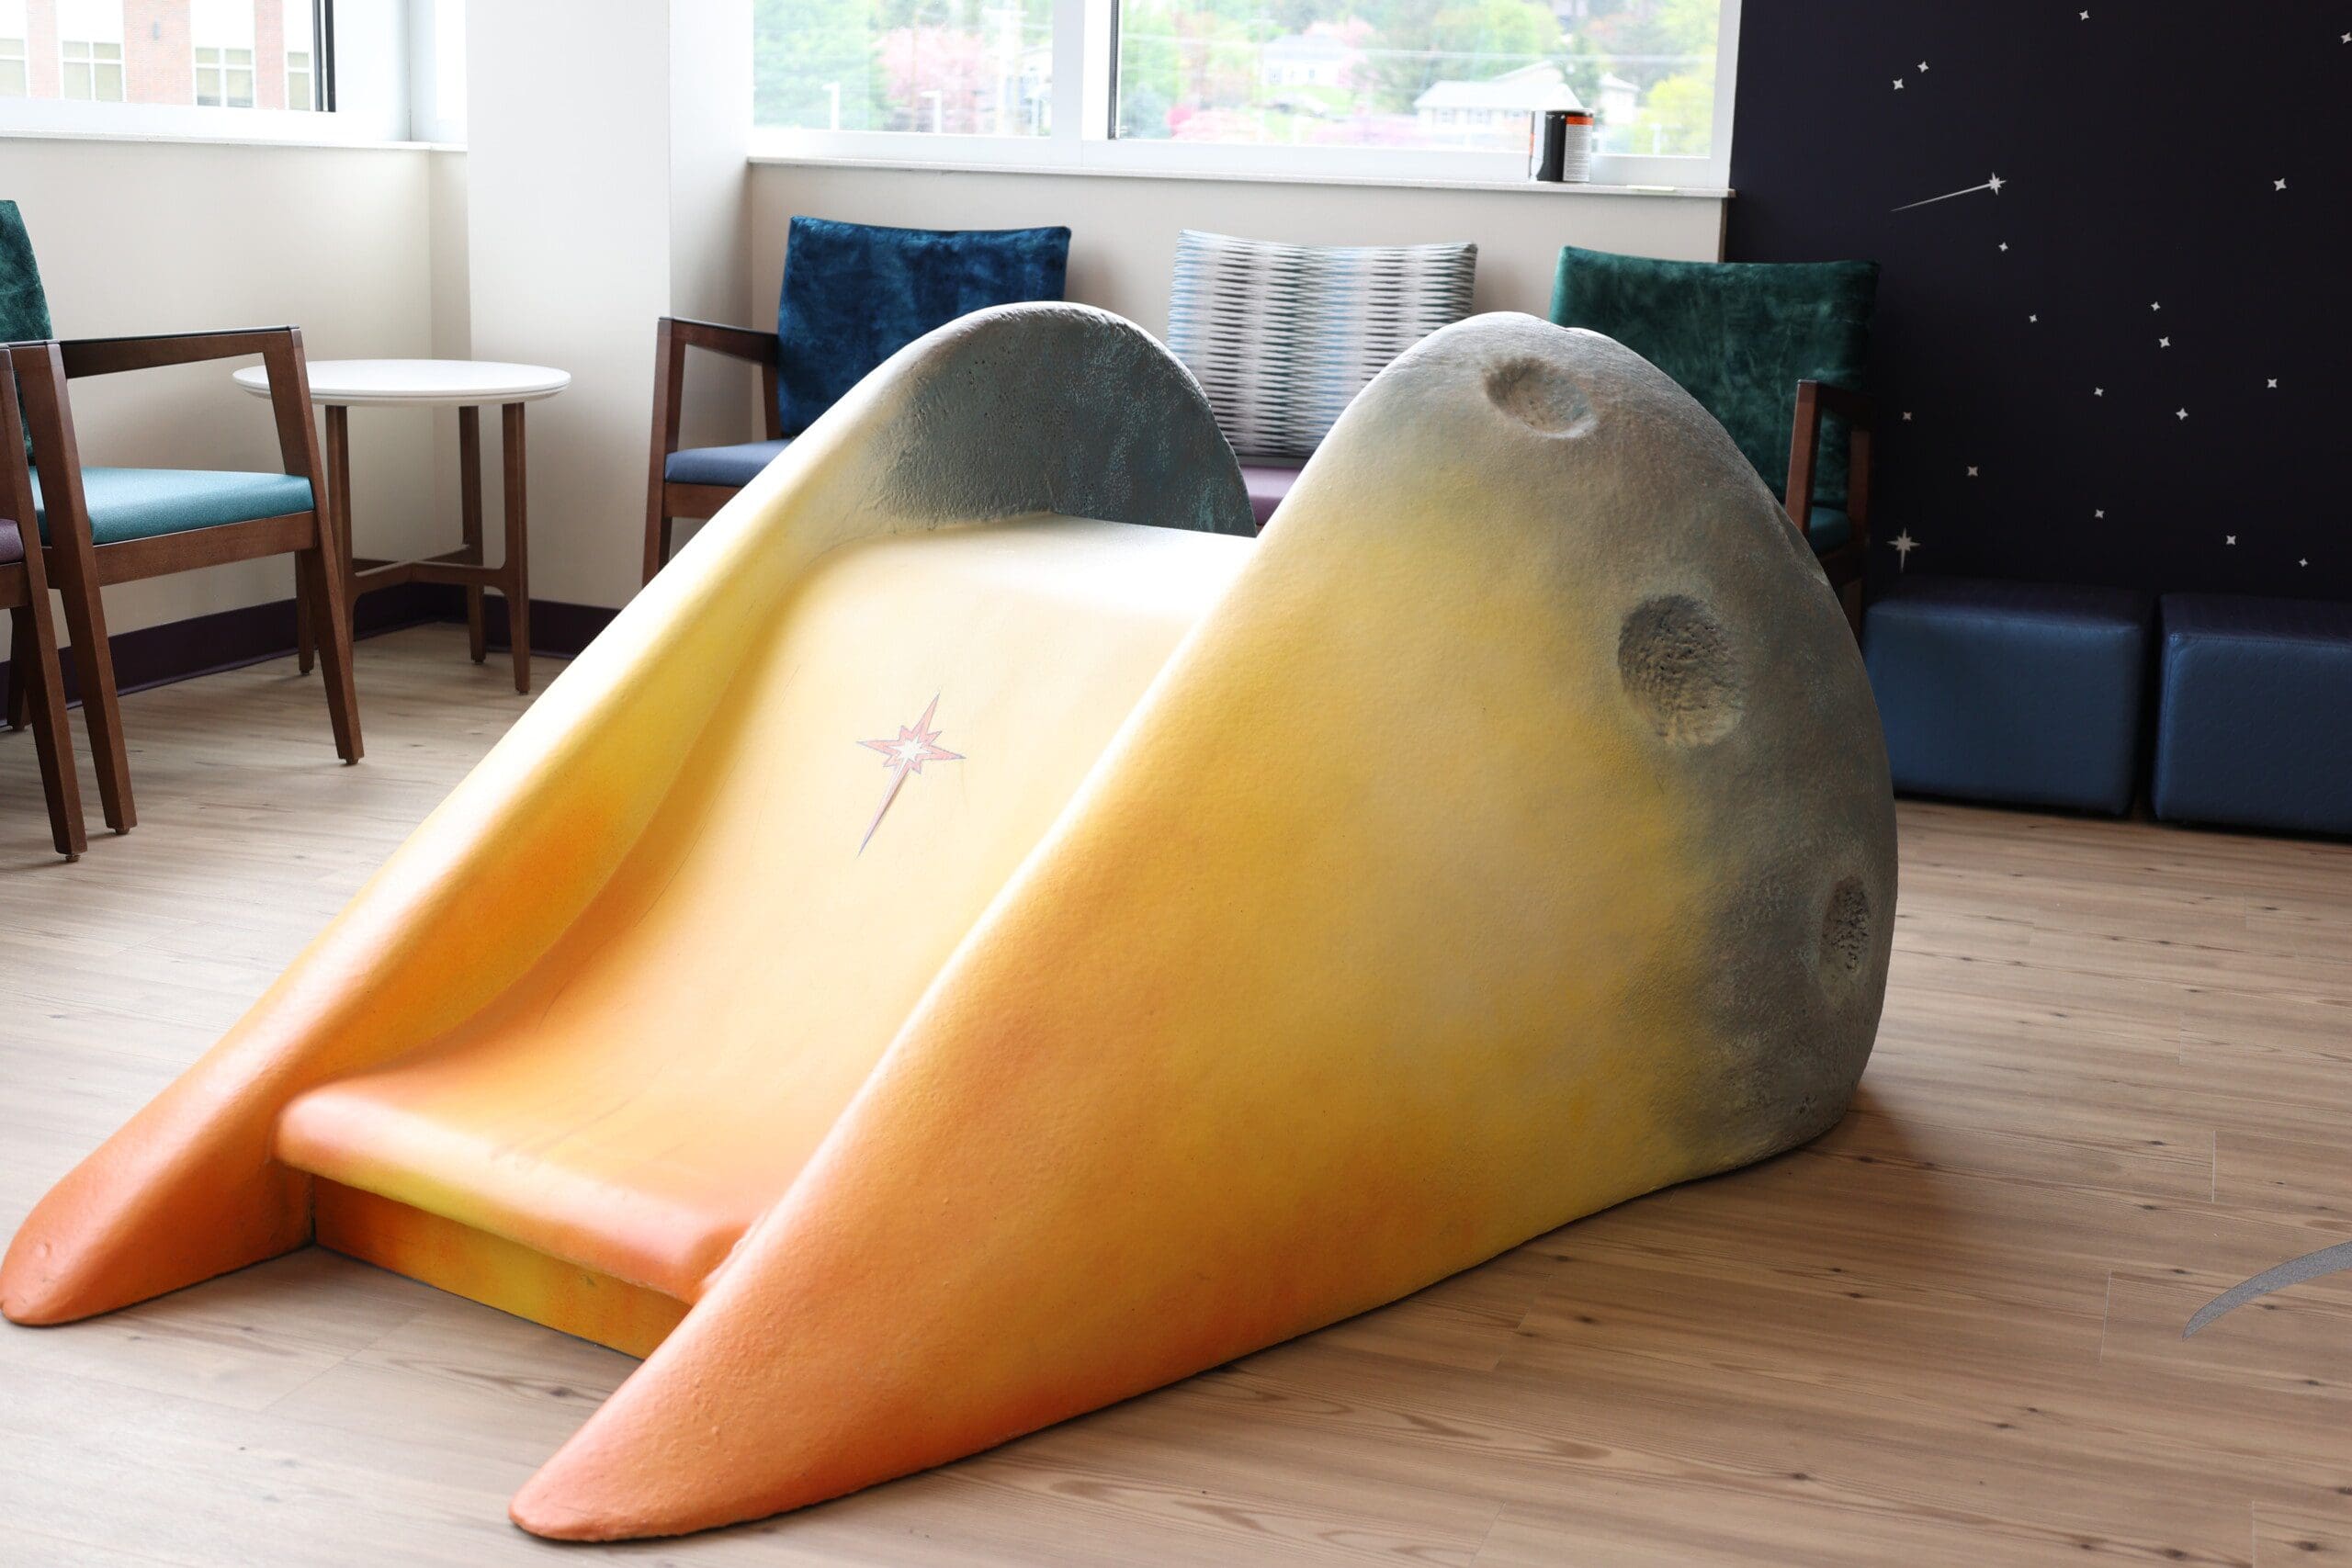 A low slide for children's play area with stary wall decoration